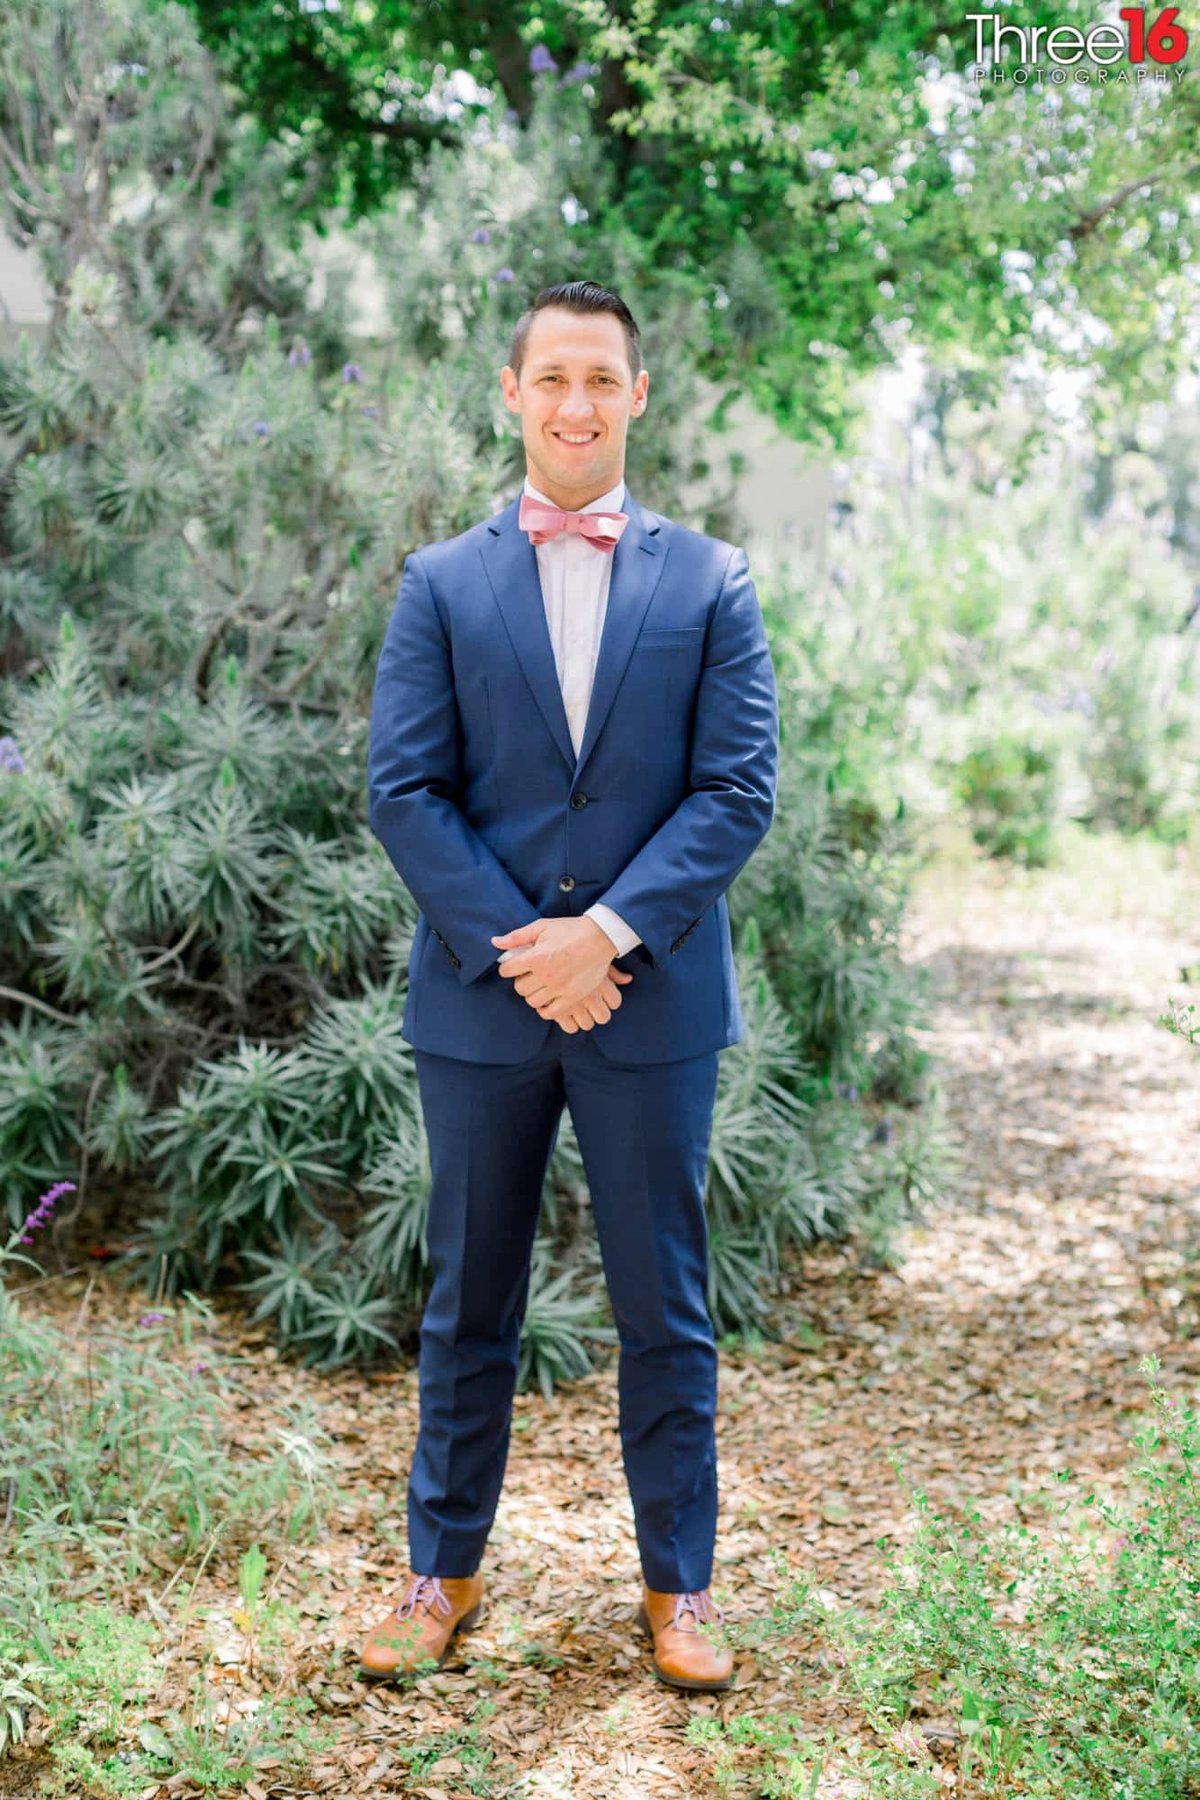 Groom poses in front of green bushes prior to the start of the wedding